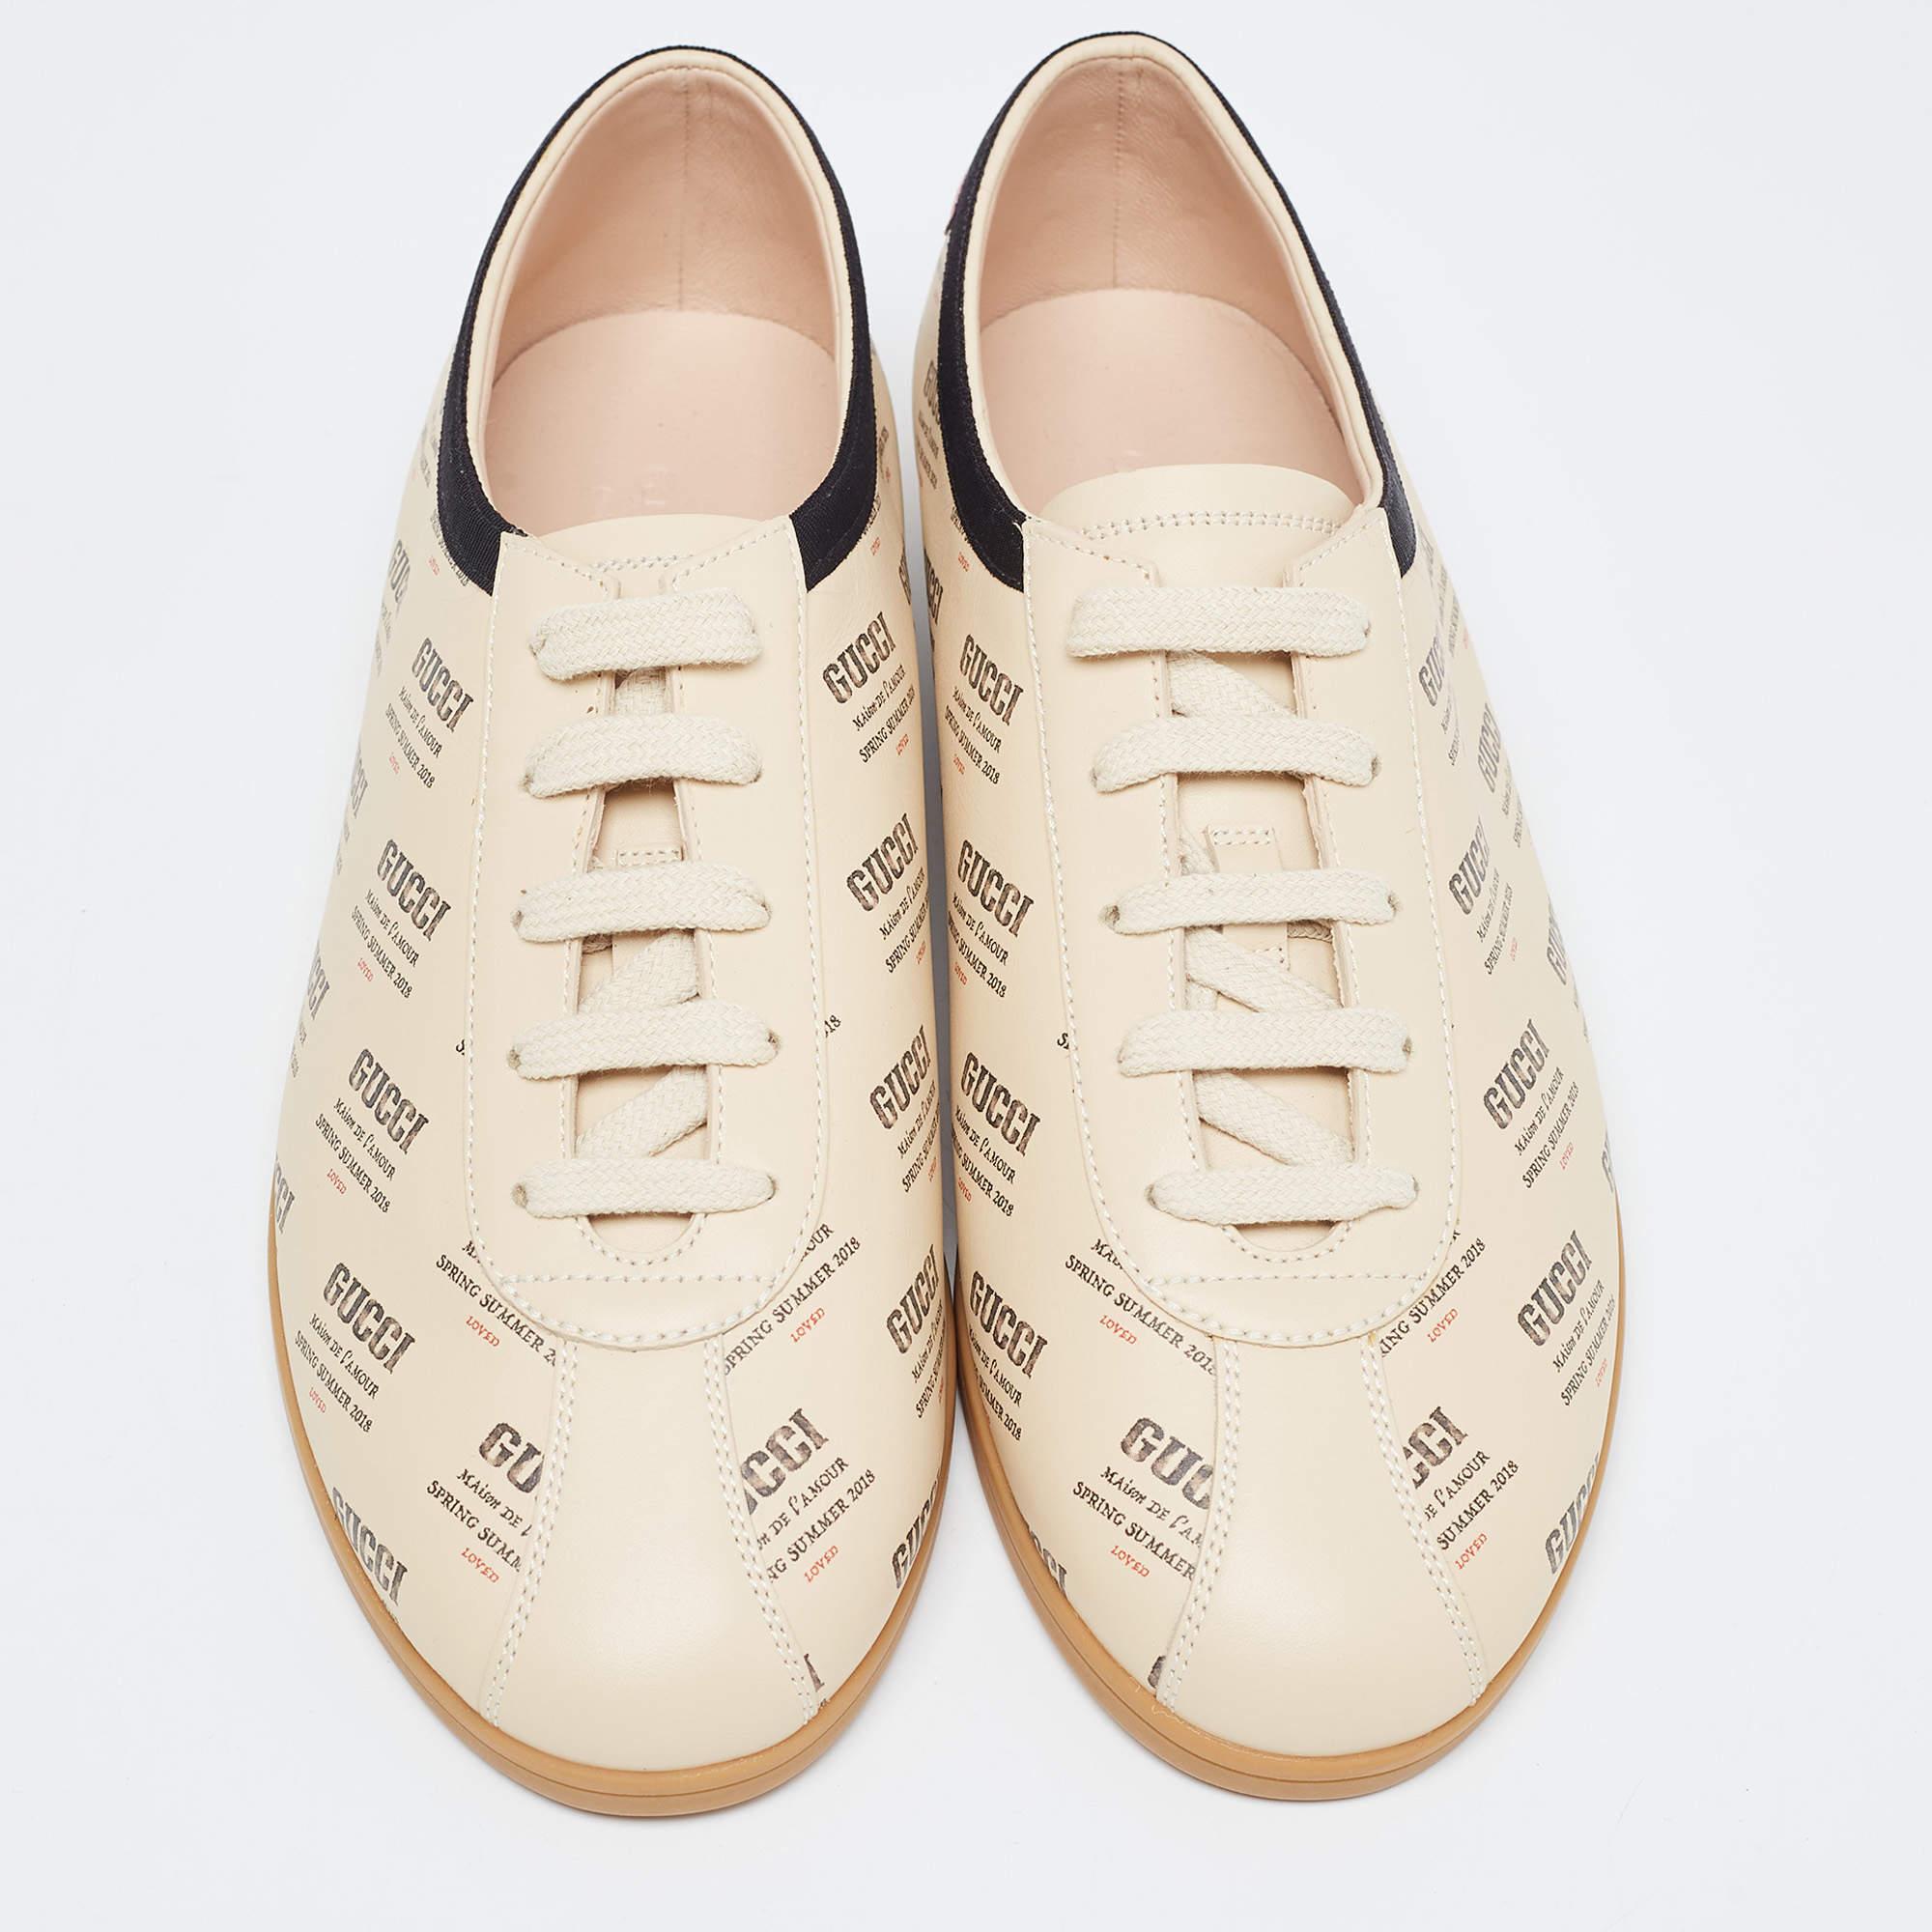 Add a statement appeal to your outfit with these sneakers. Made from premium materials, they feature lace-up vamps and relaxing footbeds. The durable sole of this pair aims to provide you with everyday ease.

